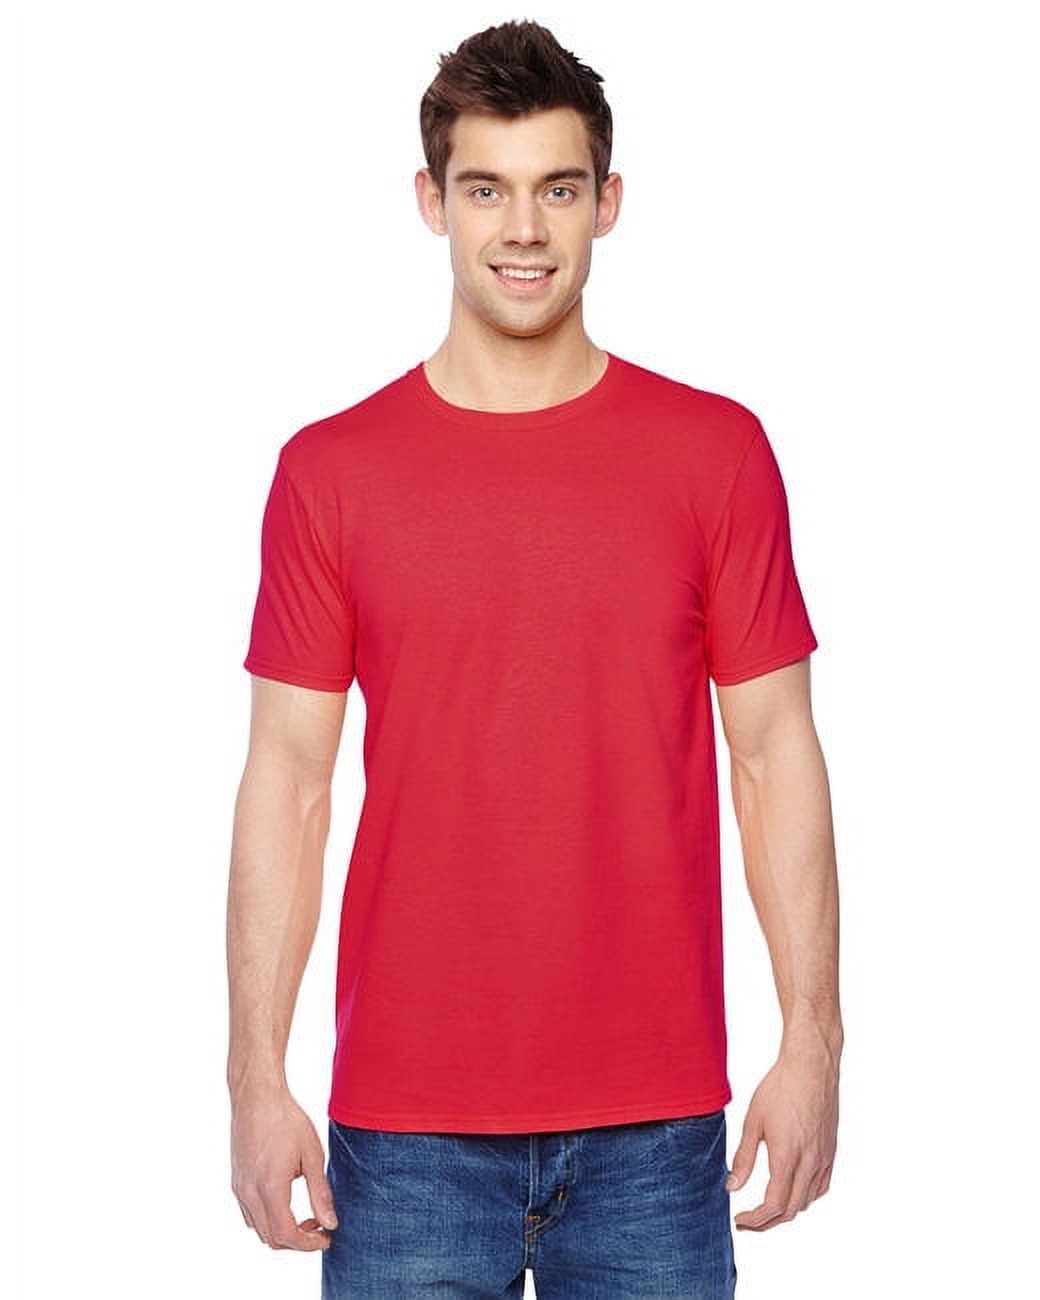 Fruit Of The Loom 100 Sofspun Cotton T-Shirt - image 1 of 4